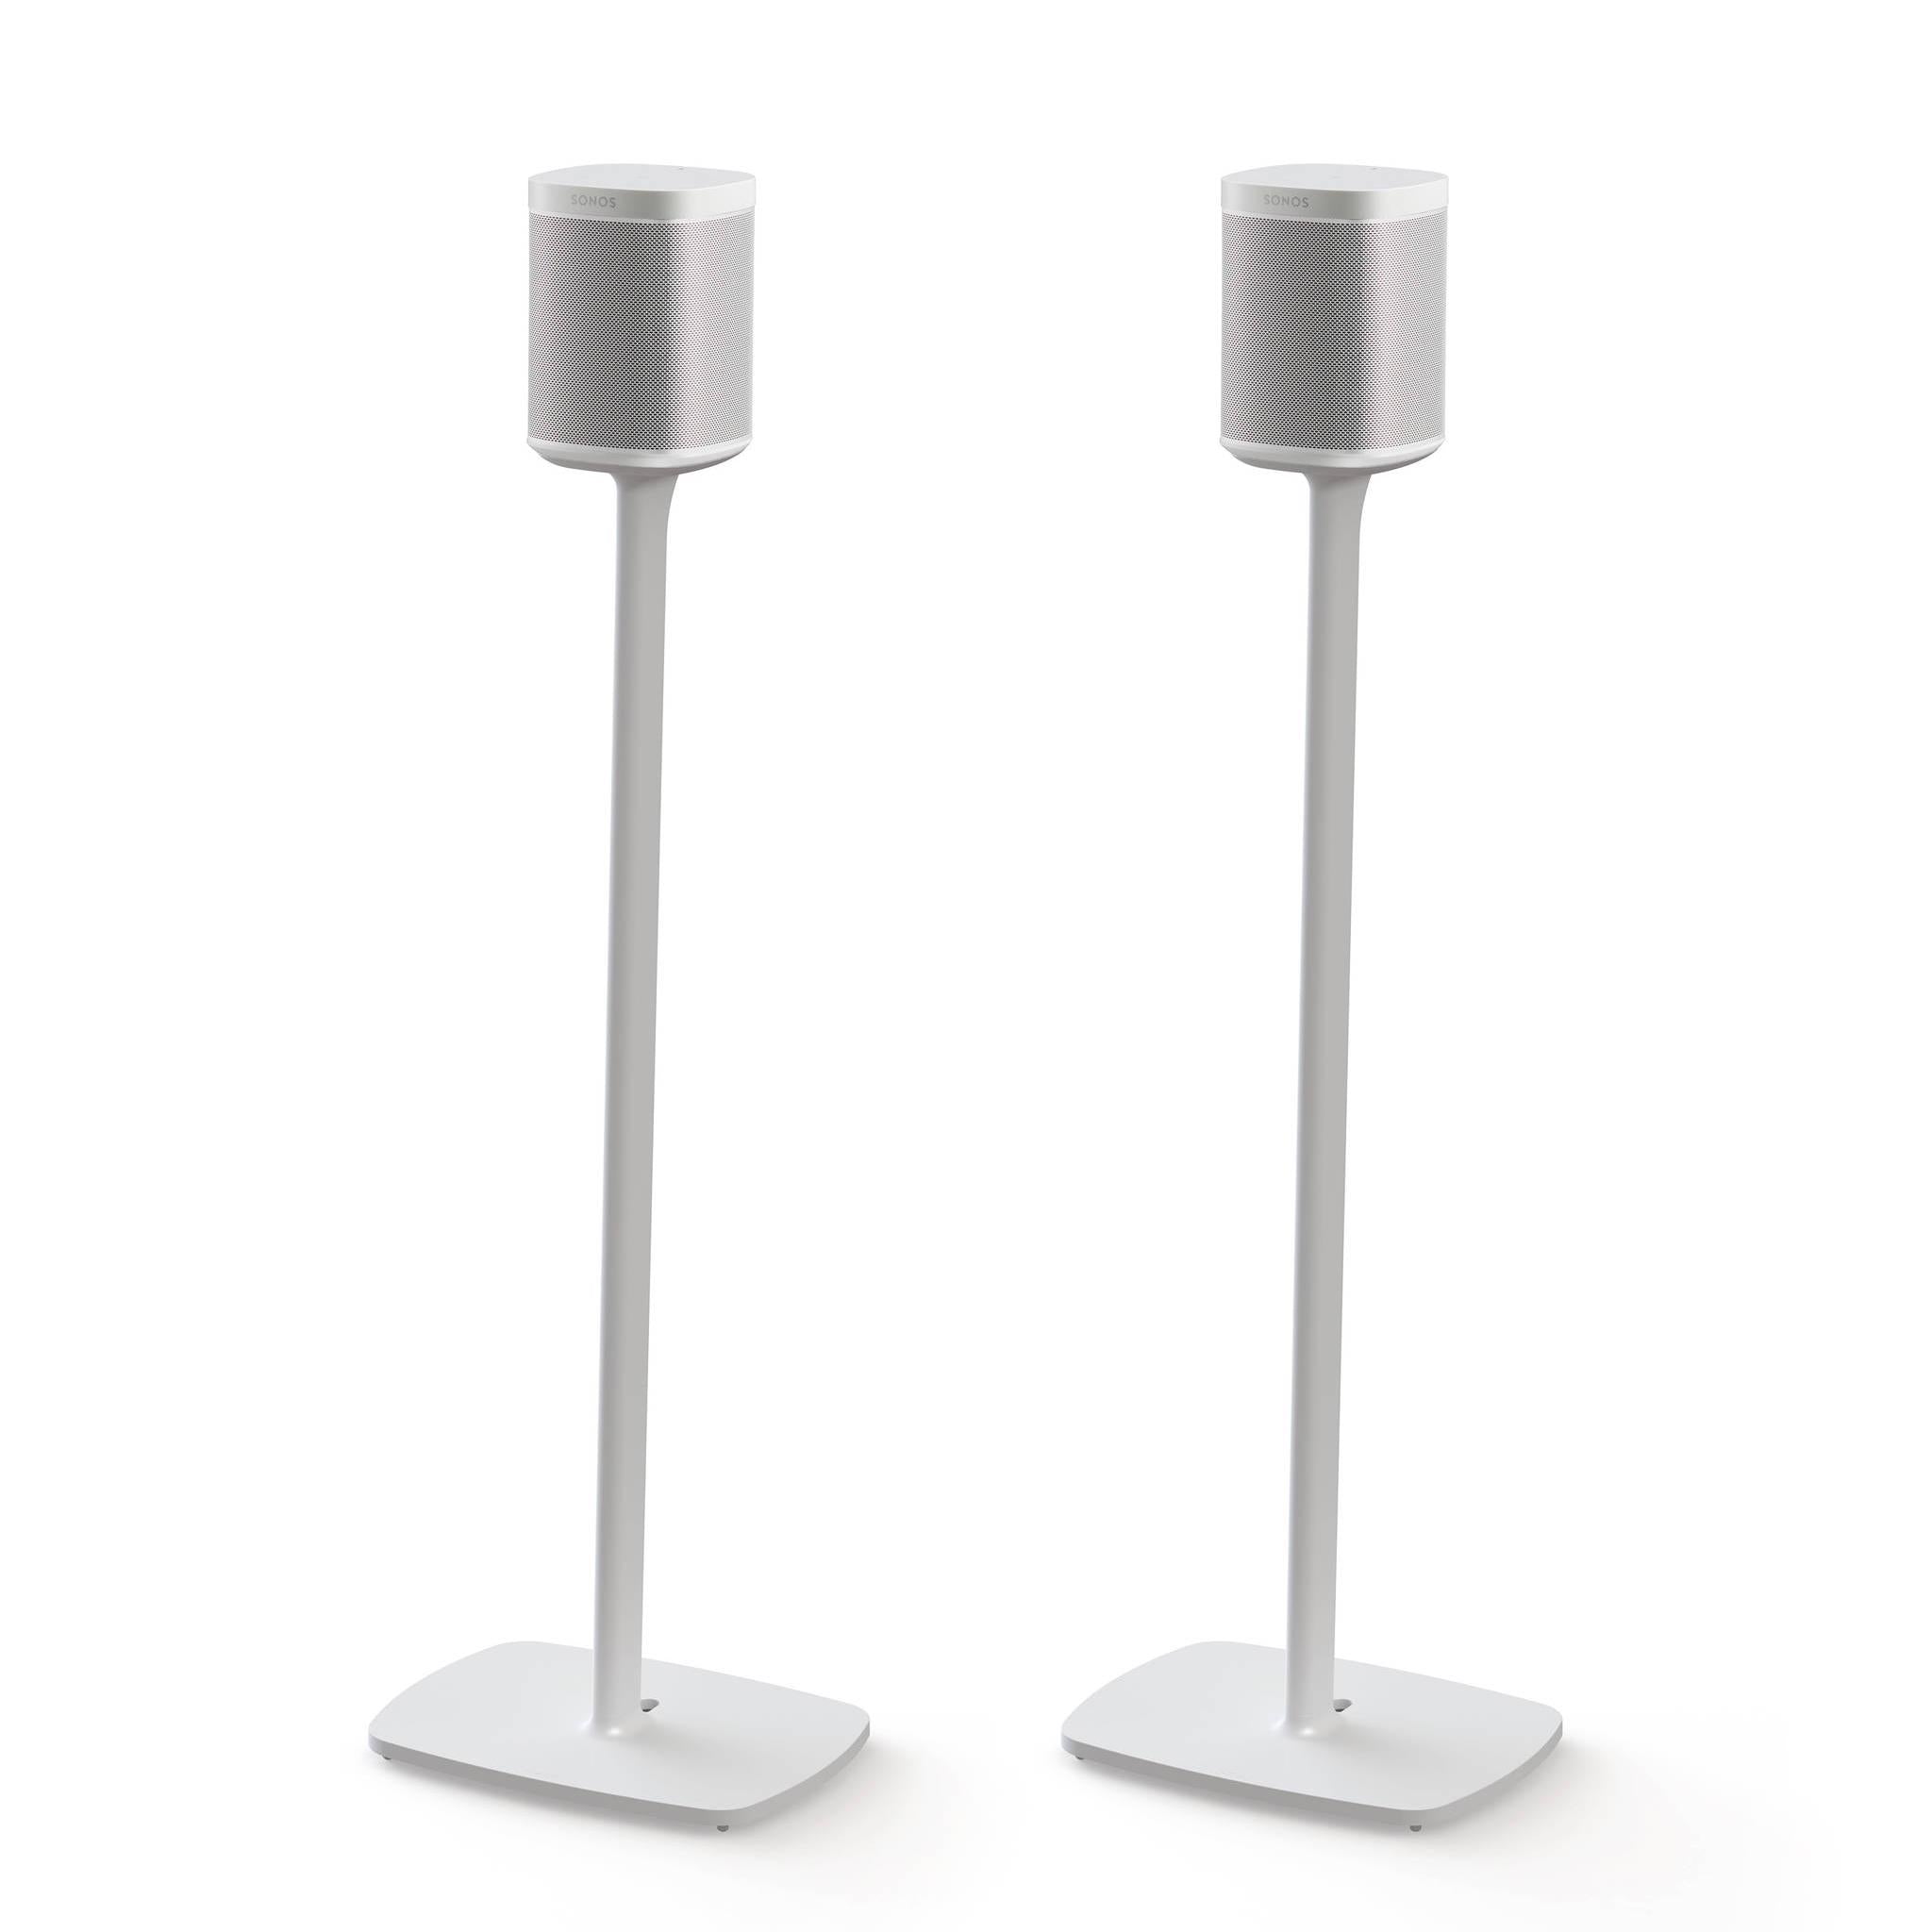 Sonos Flexson Floor Stand for Sonos One, One SL and Play:1 - Piece - AVStore